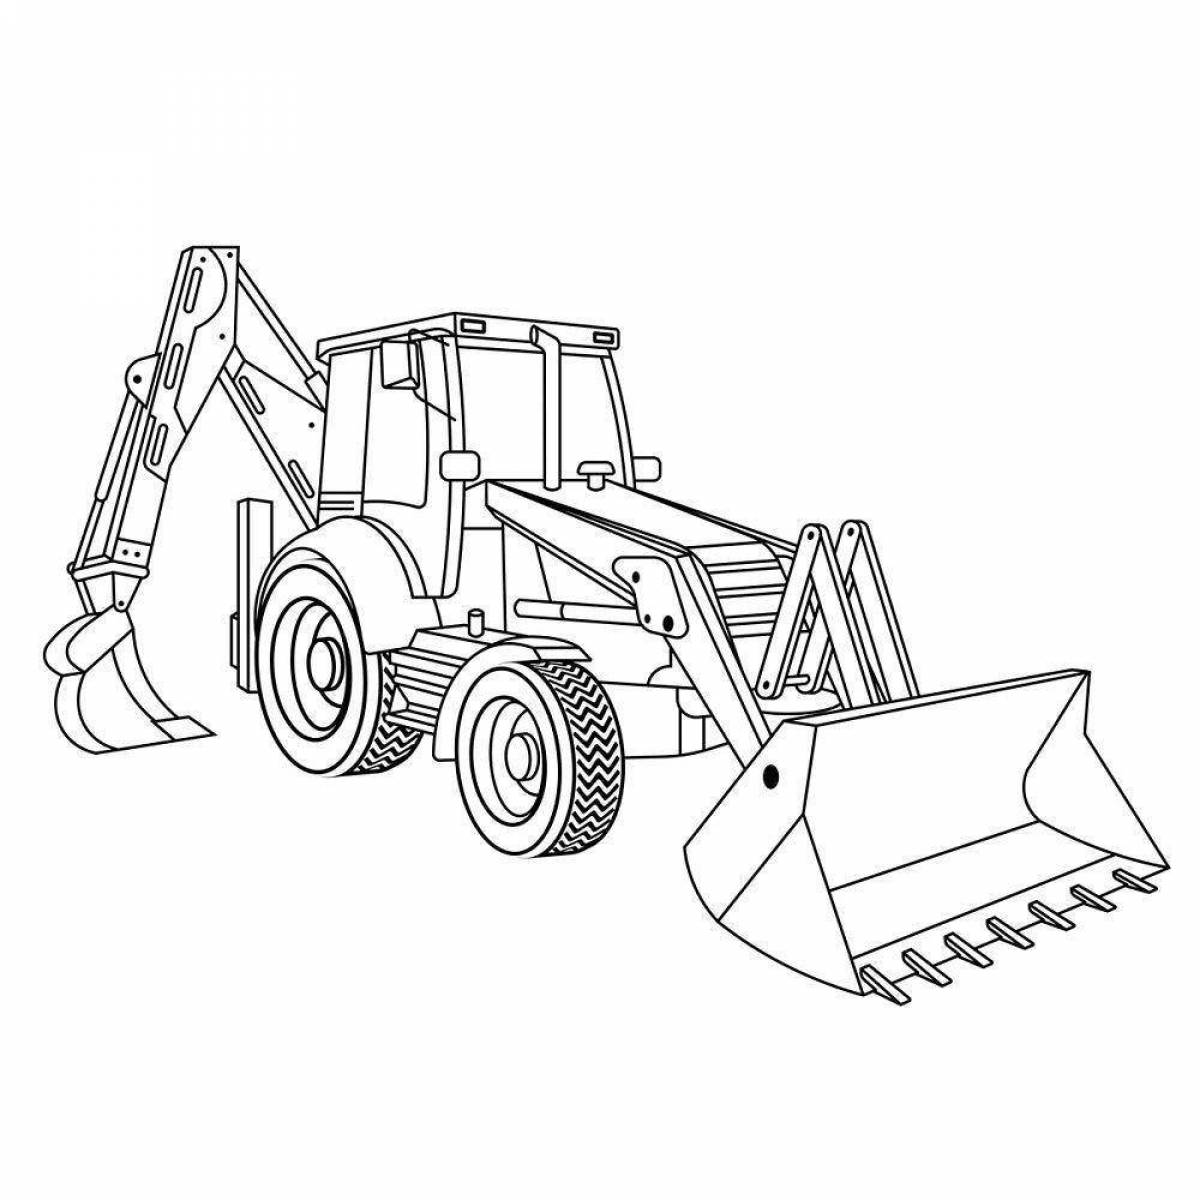 Attractive forklift coloring book for kids